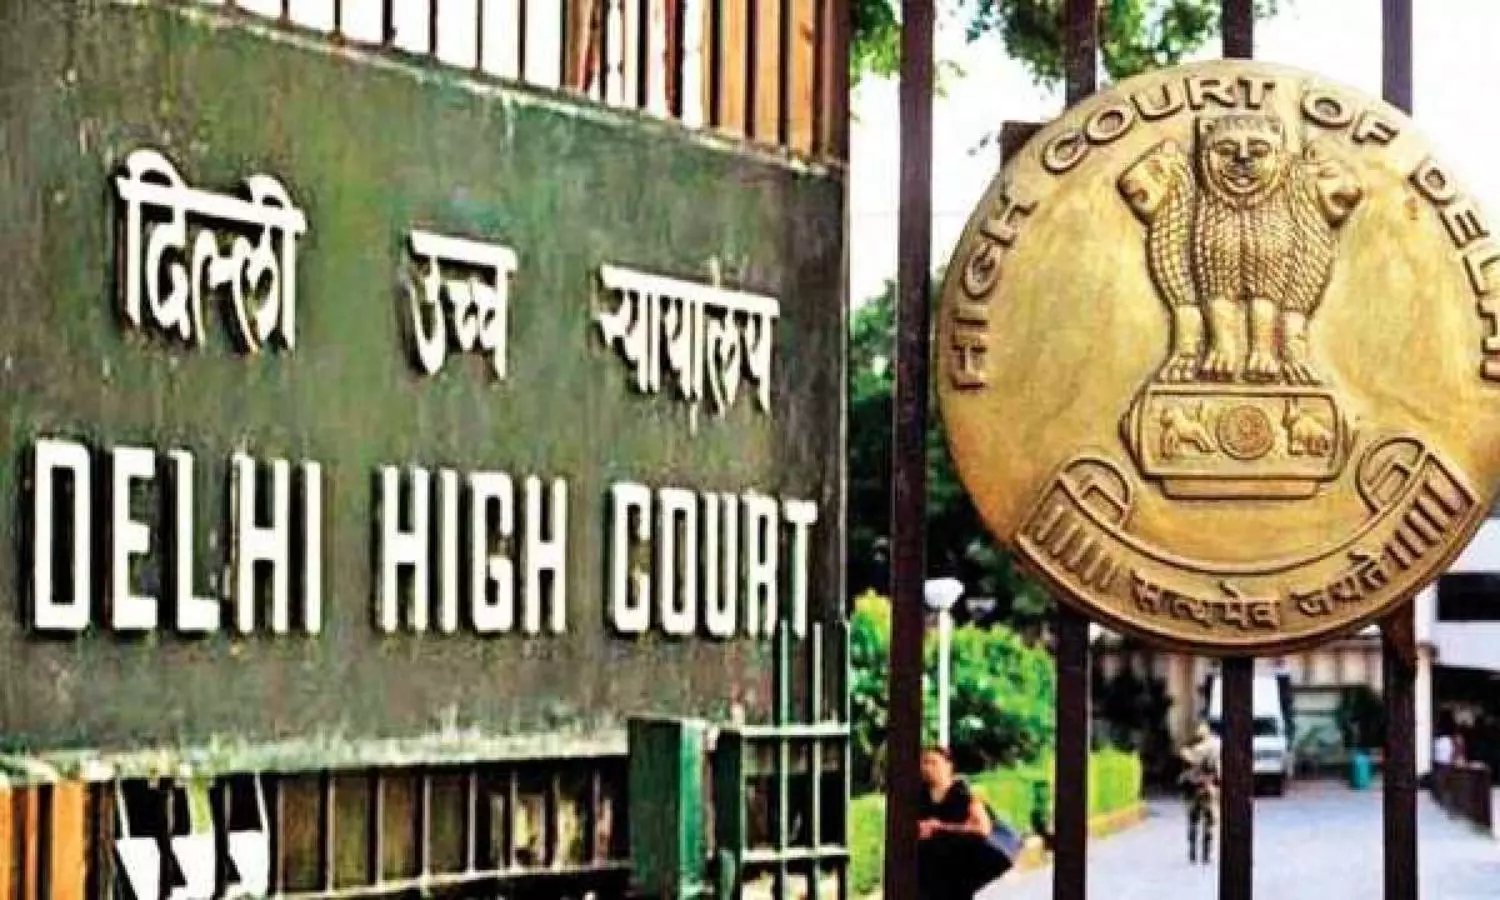 Sale of coronary stent only after submission of adequate supporting clinical studies: Delhi HC seeks Centre stand on plea